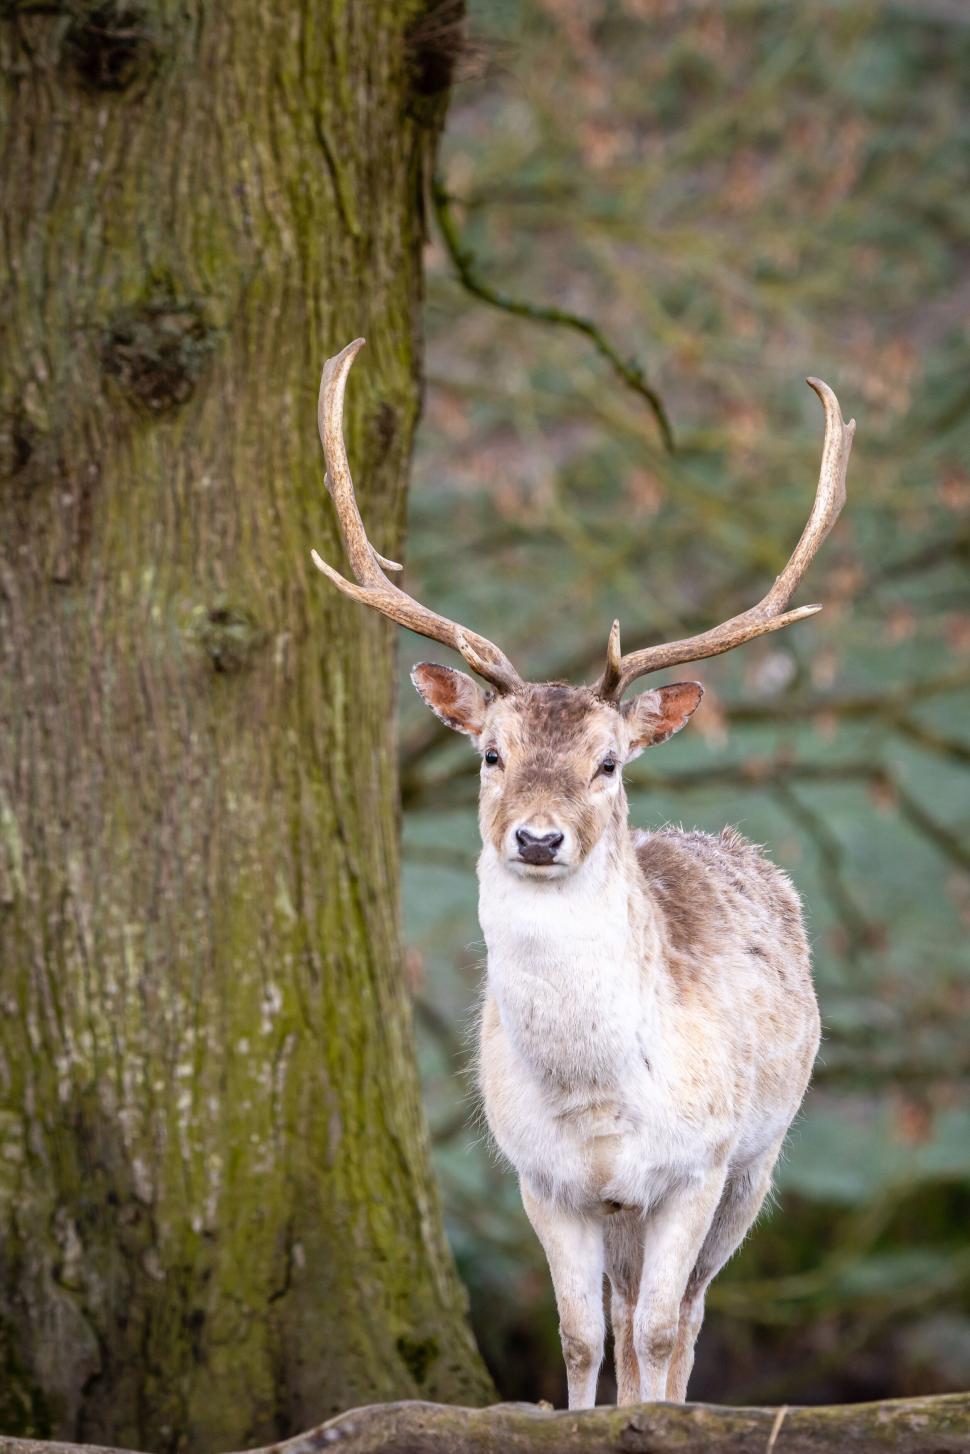 Free Image of Deer with antlers in wooded area 